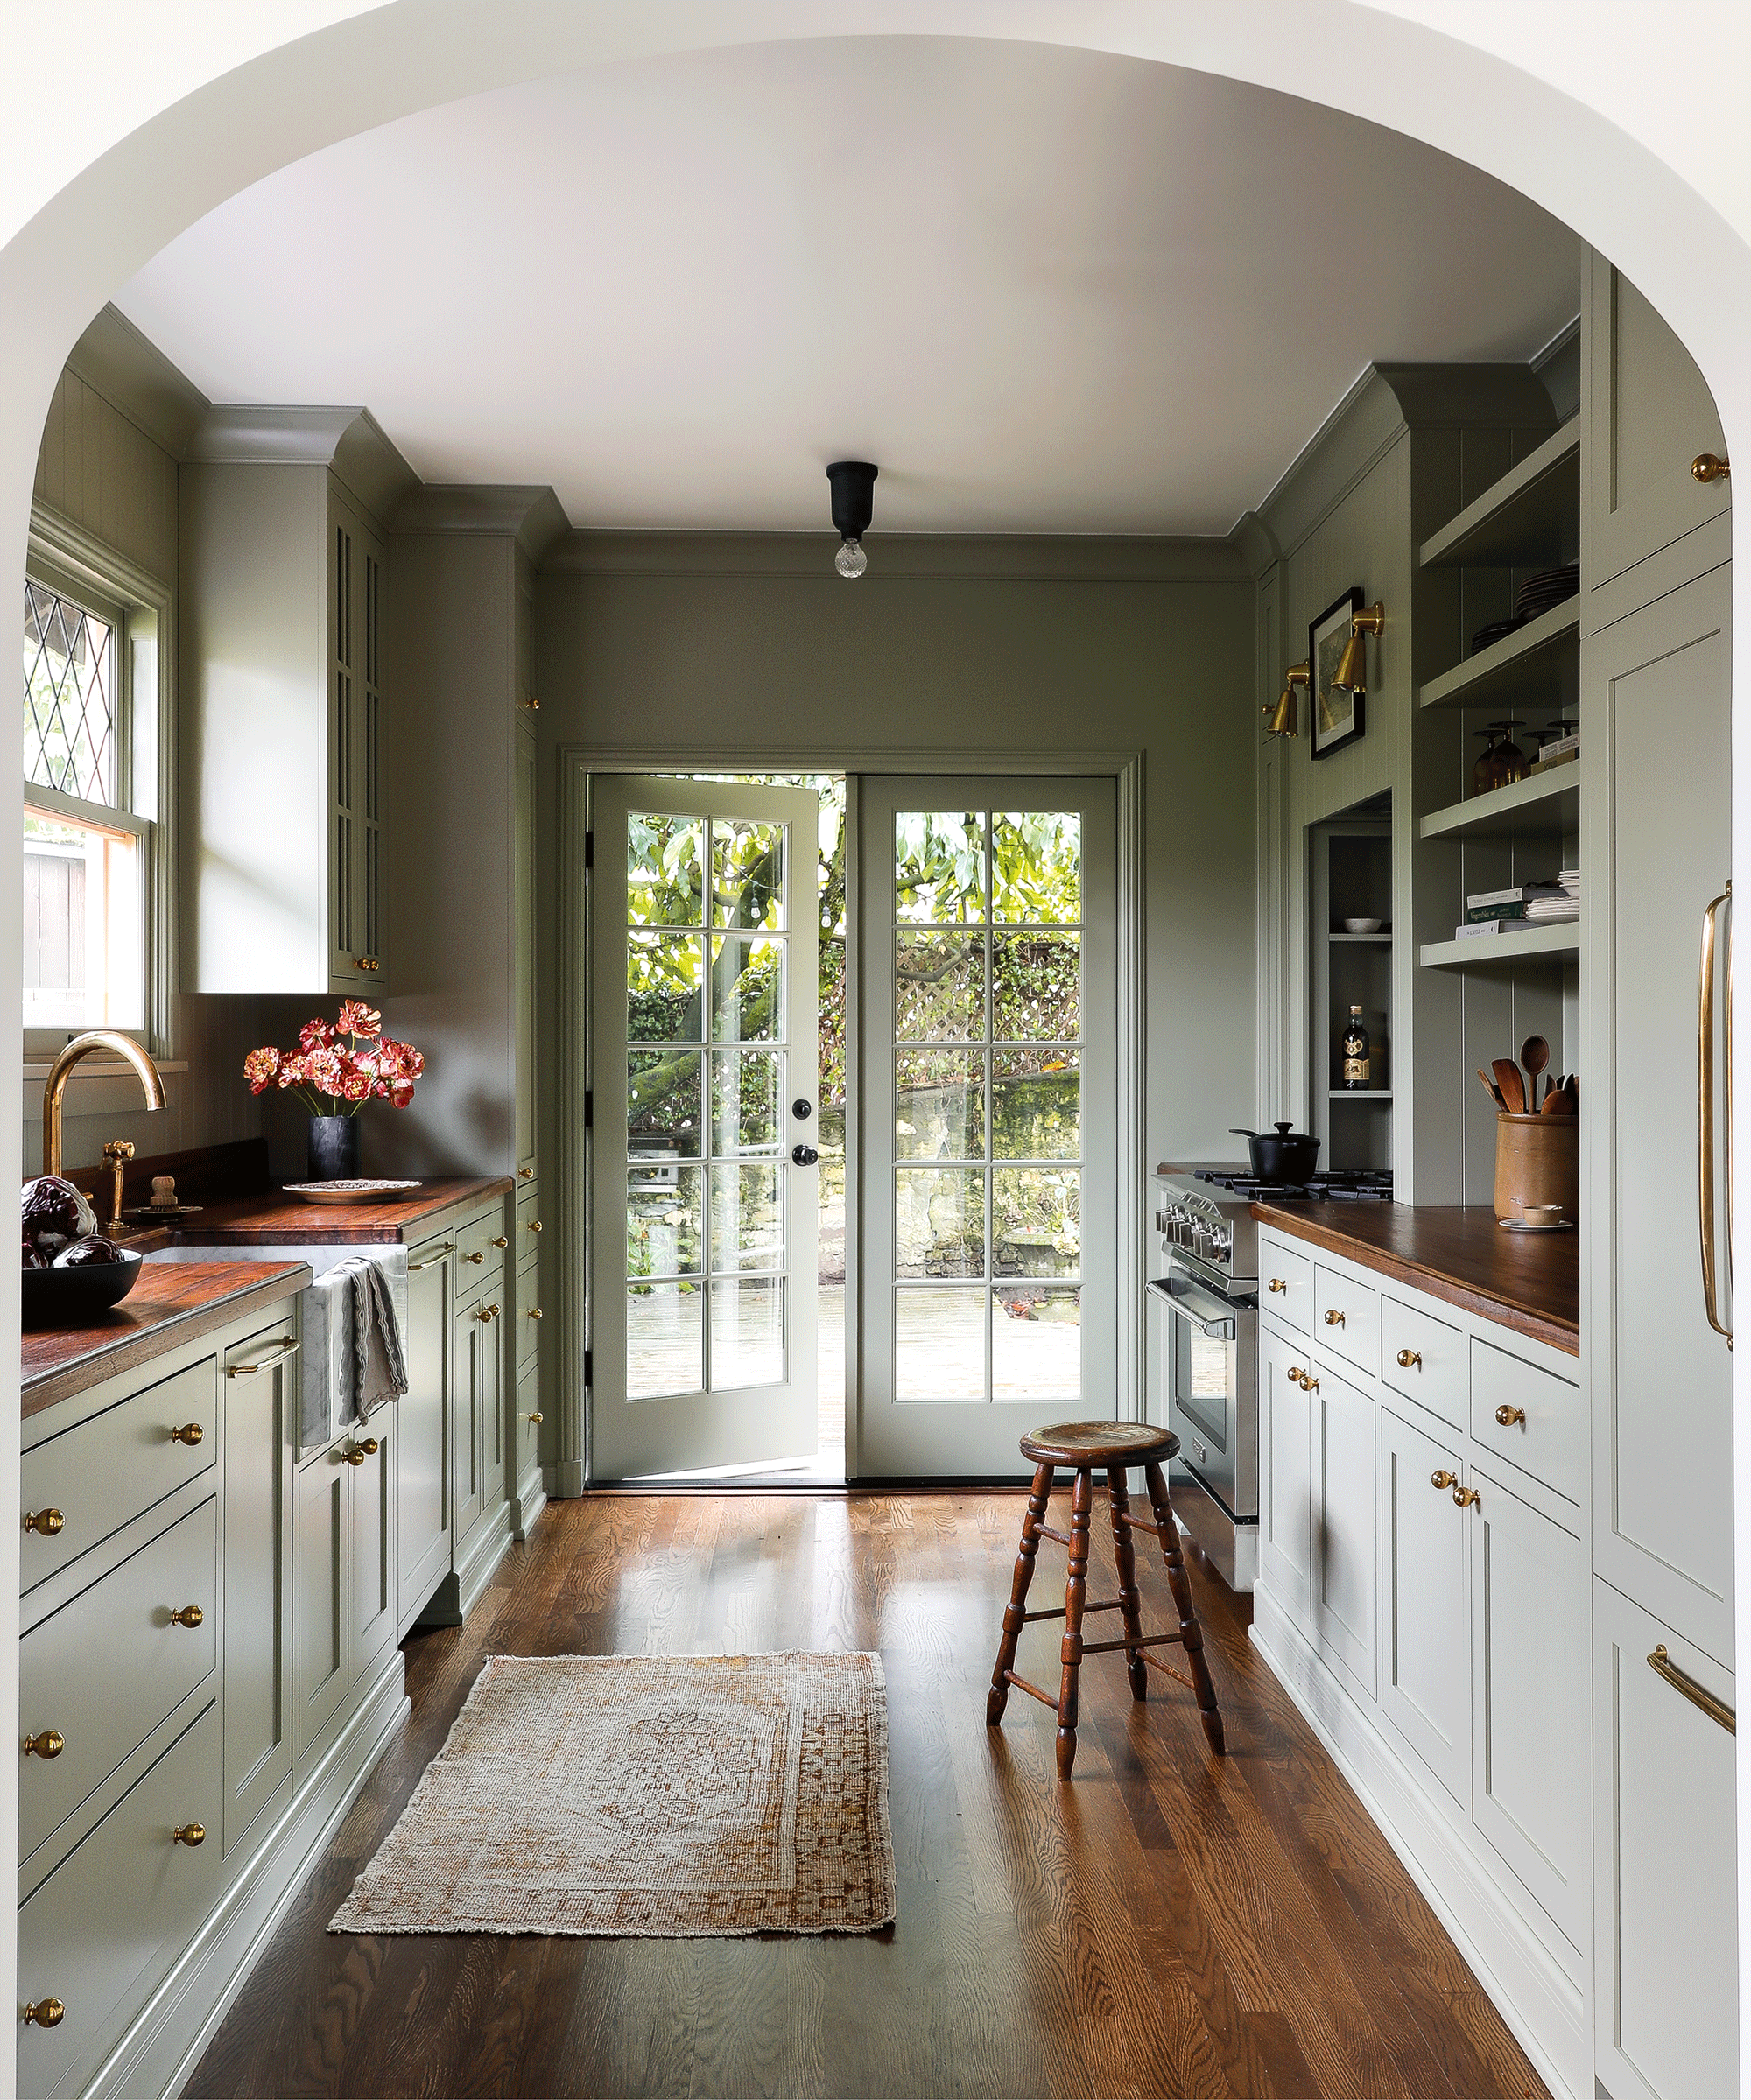 Gallery kitchen painted in Farrow & Ball's French Grey